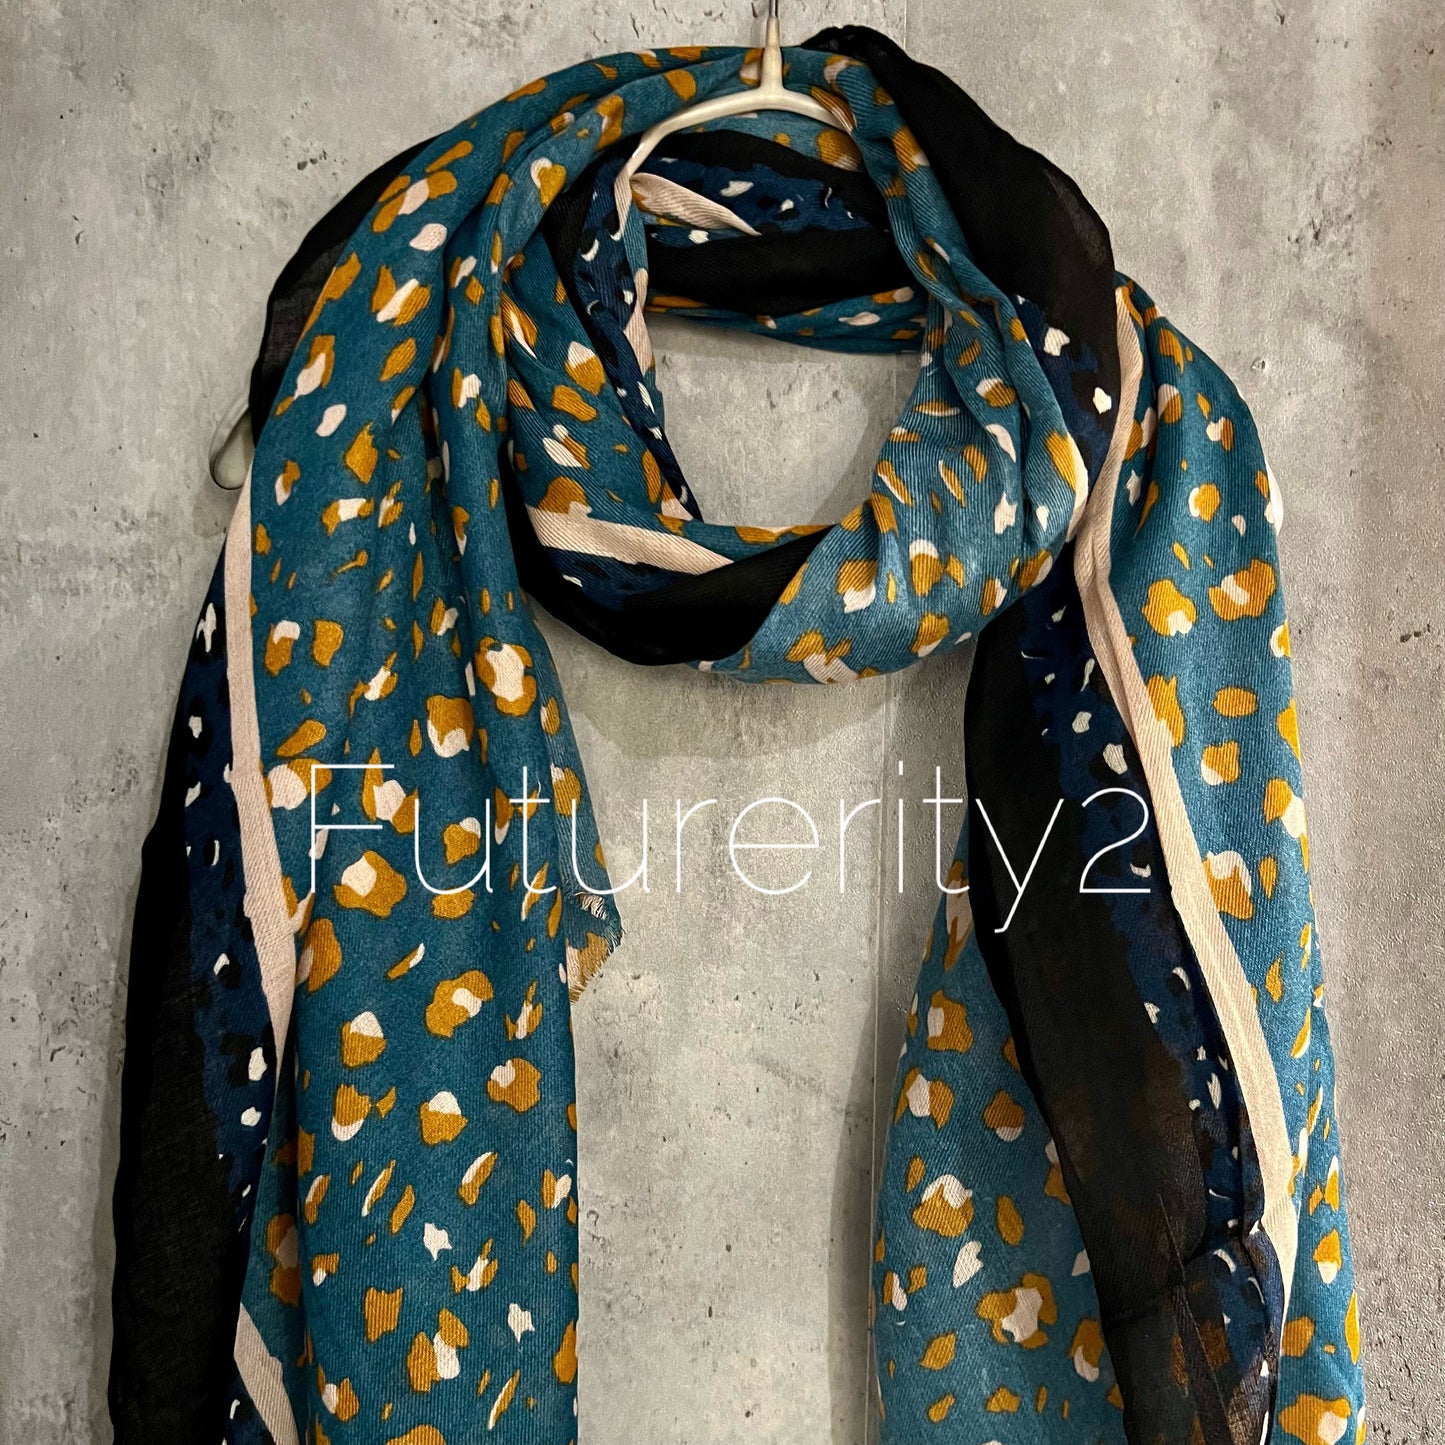 Leopard Pattern With Black Trim Green Cotton Scarf/Summer  Autumn Scarf/Scarf Women/Gifts For Mum/Gifts For Her Birthday Christmas/UK Seller